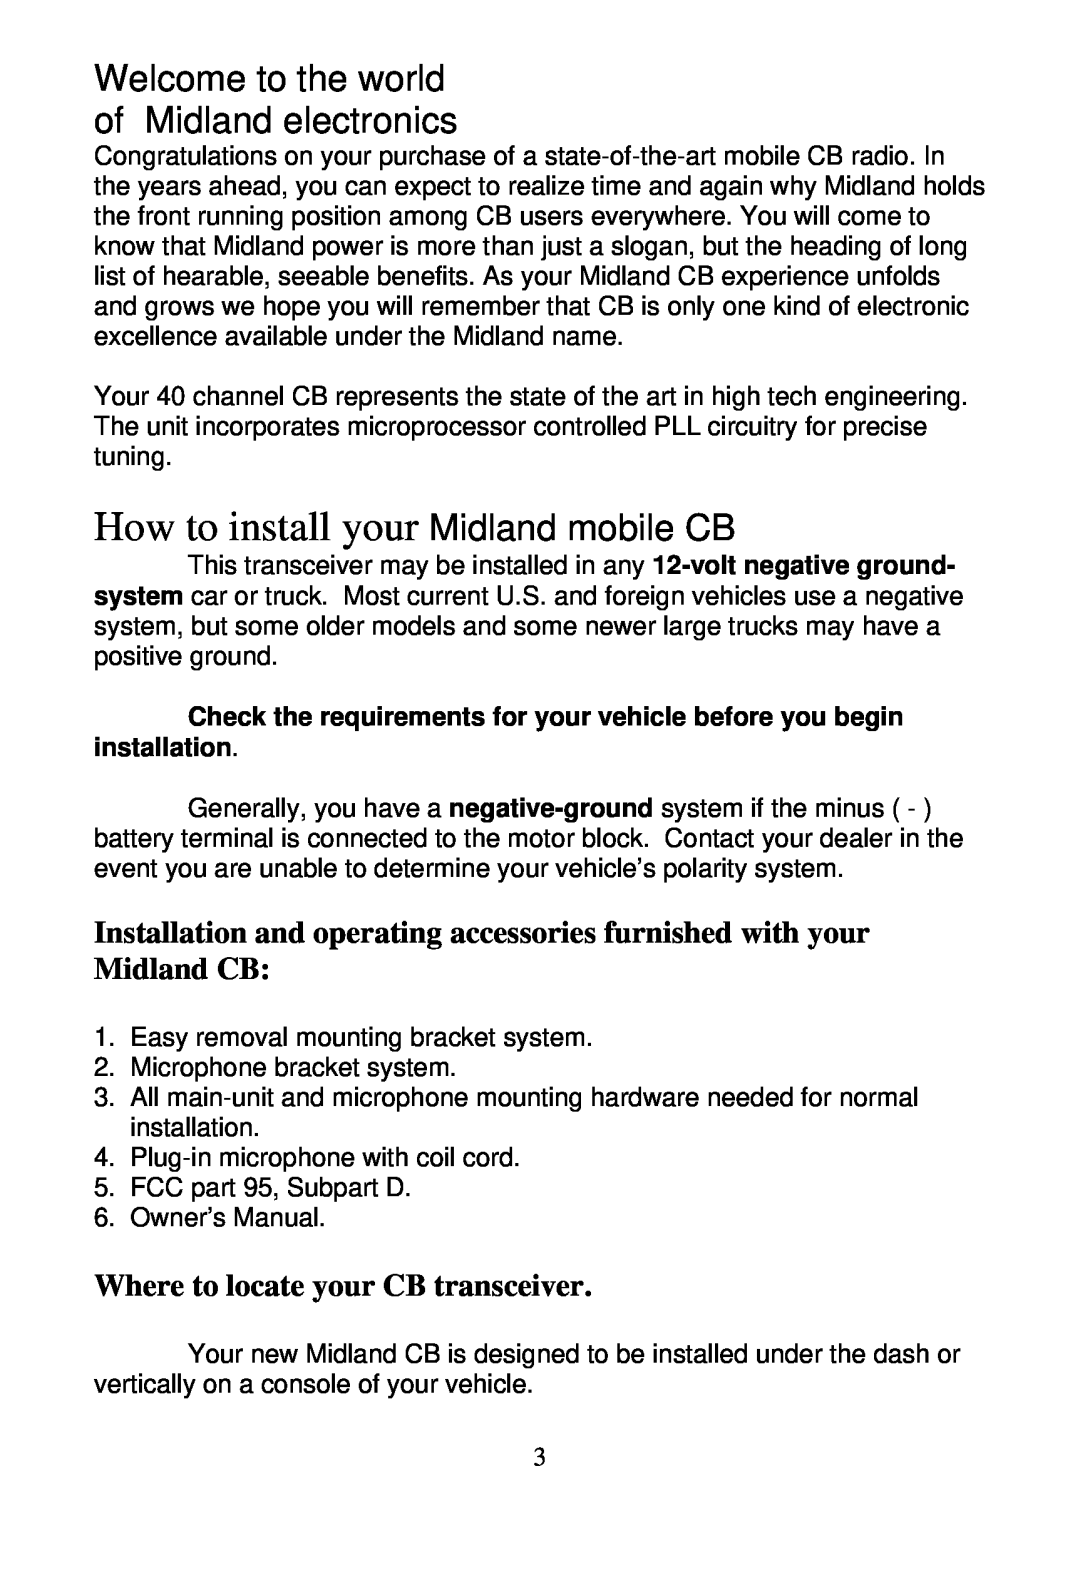 Midland Radio 1001z manual How to install your Midland mobile CB, Welcome to the world of Midland electronics 